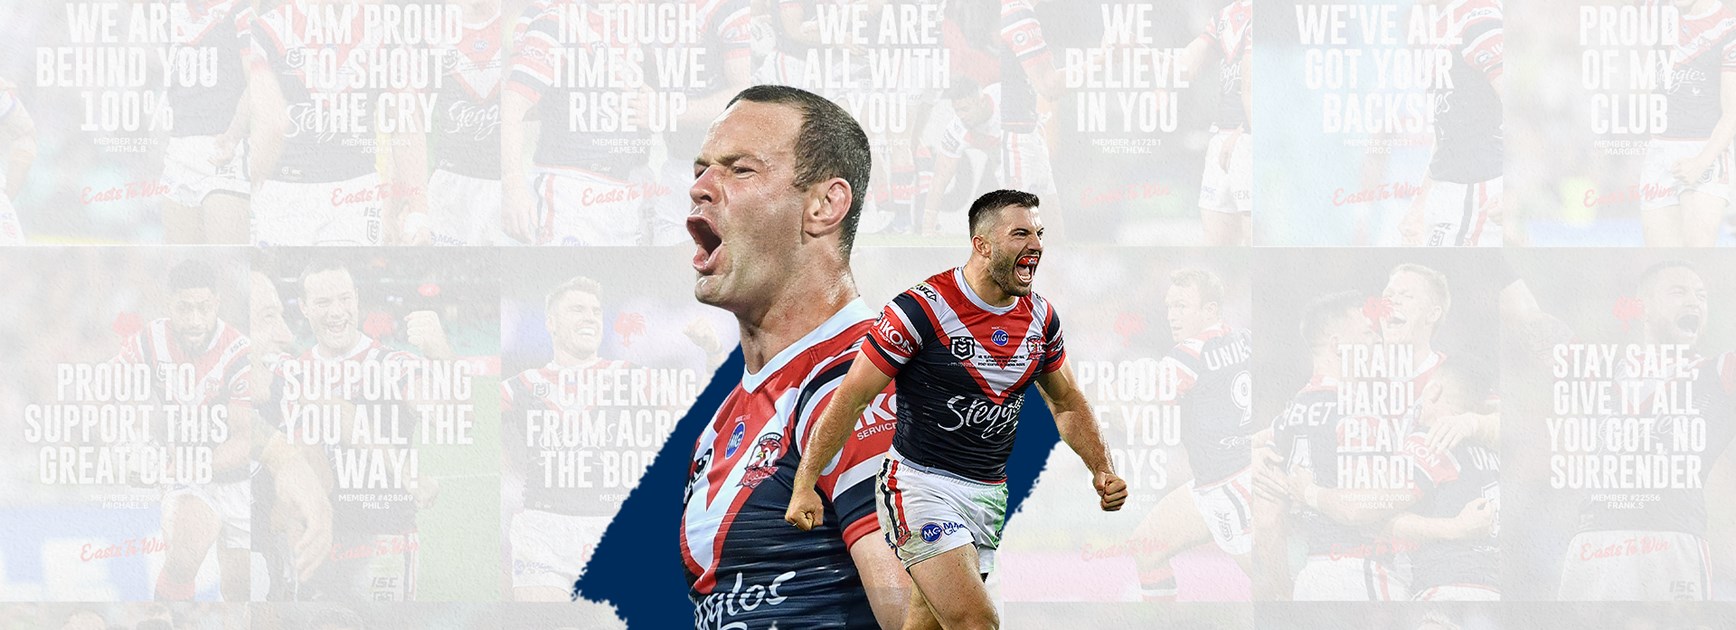 Roosters Humbled By Members Support